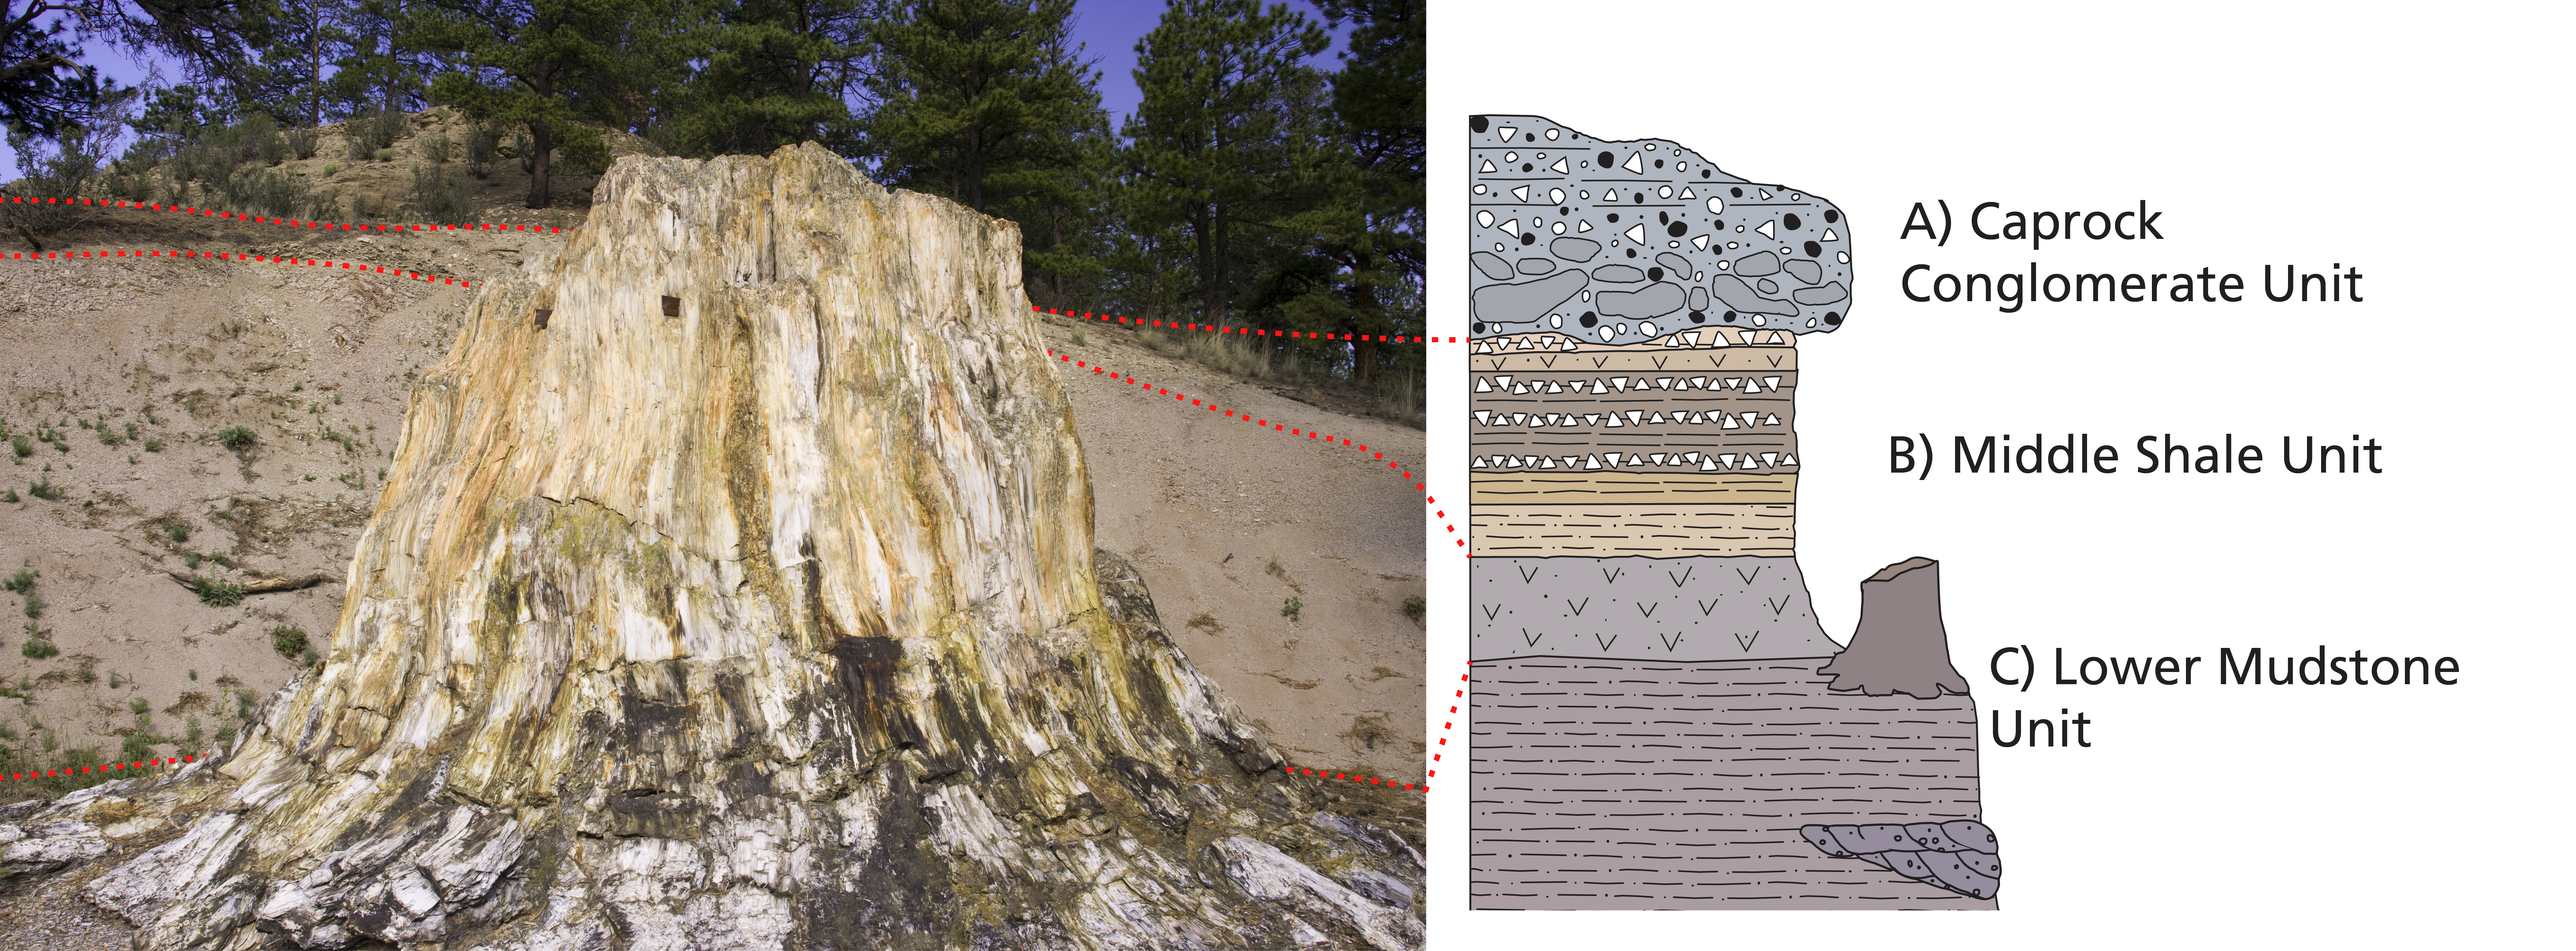 On the left is an image of a petrified redwood stump in front of a hill exposing layers of rock. Red dashed lines cross the image through the rock units. On the right is a stratigraphic column with the rock units drawn out schematically.